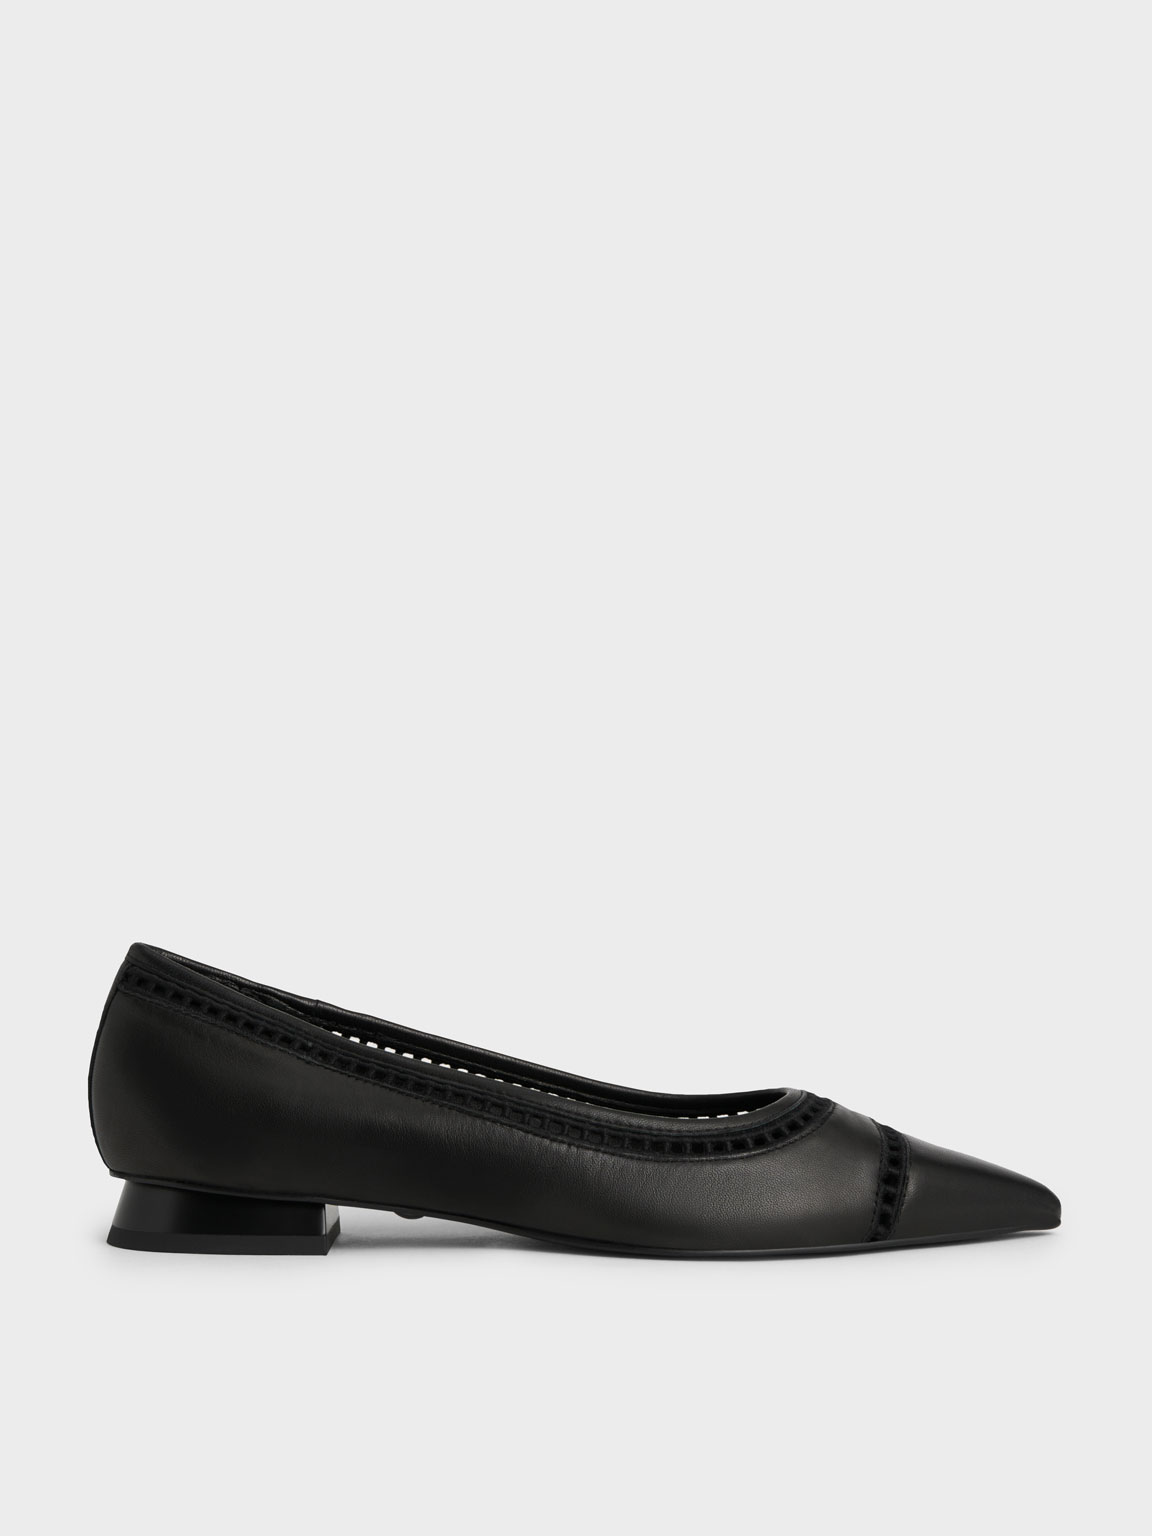 These Affordable H&M Ballet Flats Should and Will Sell Out | Who What Wear